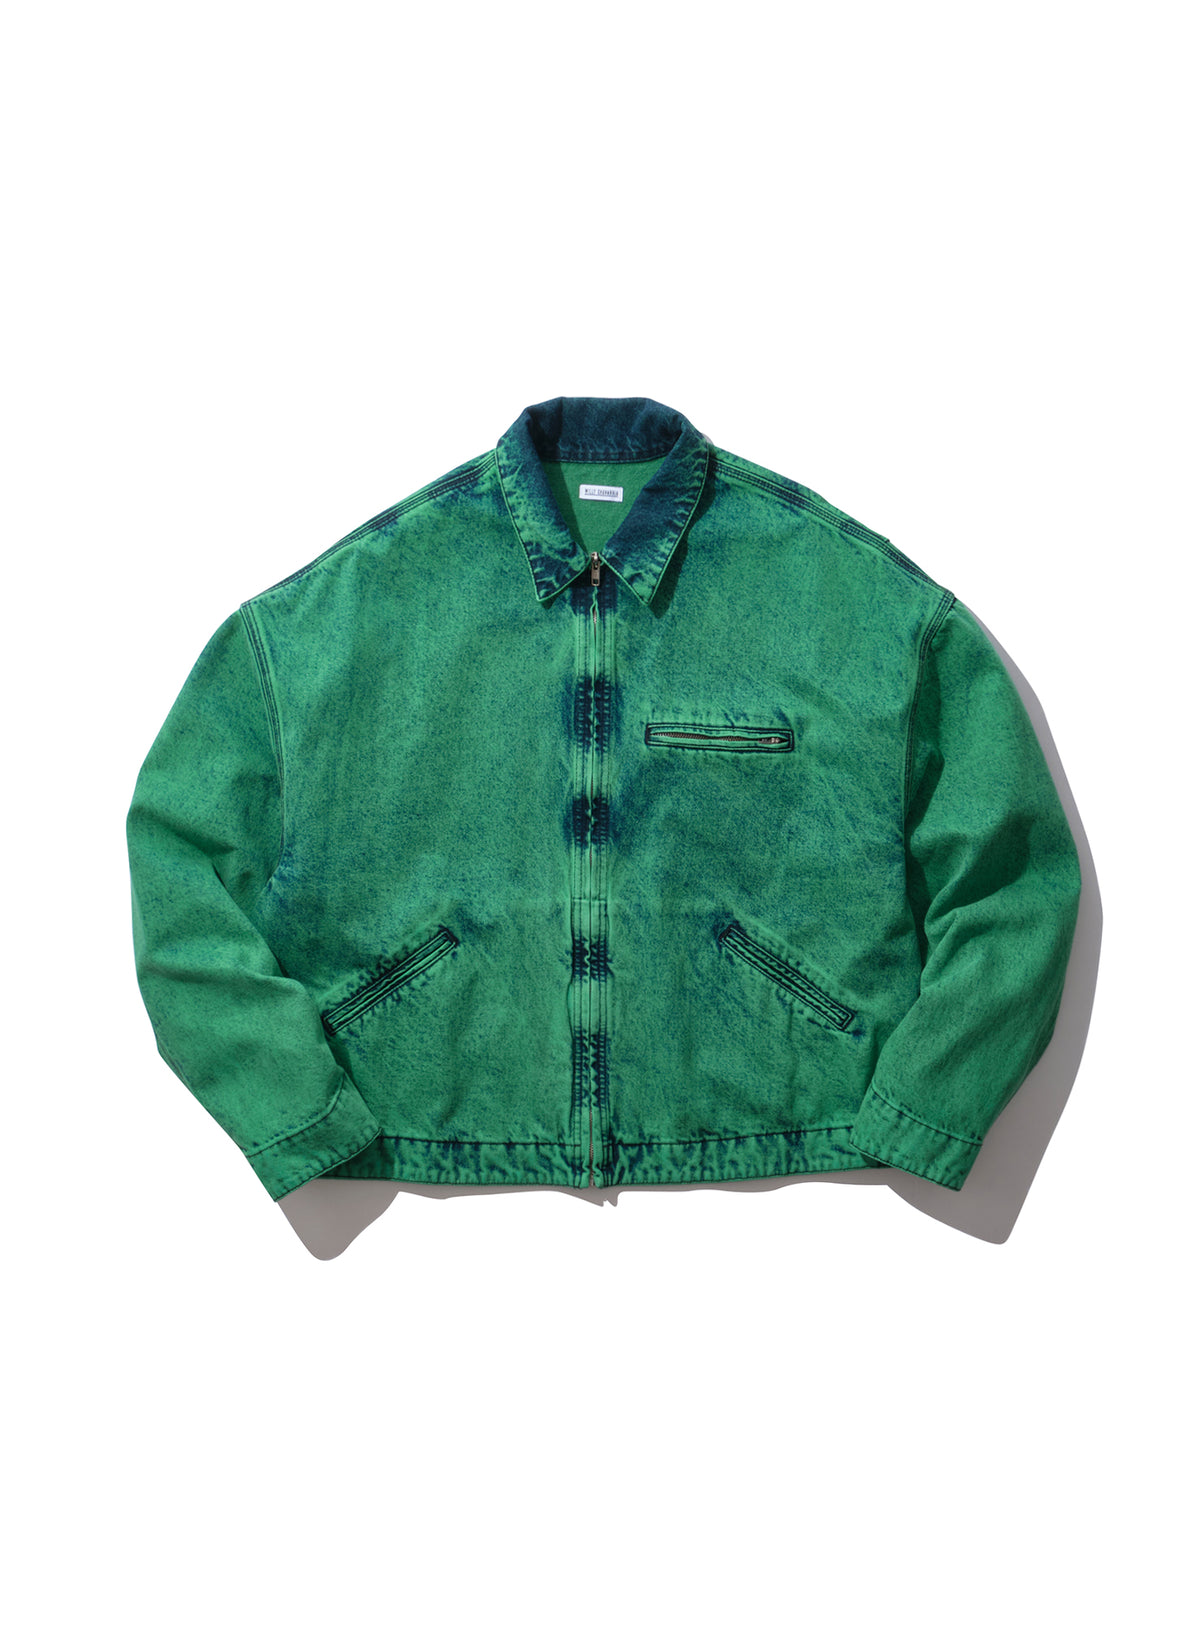 WILLY CHAVARRIA / DOWNTOWN JACKET OVERD GREEN